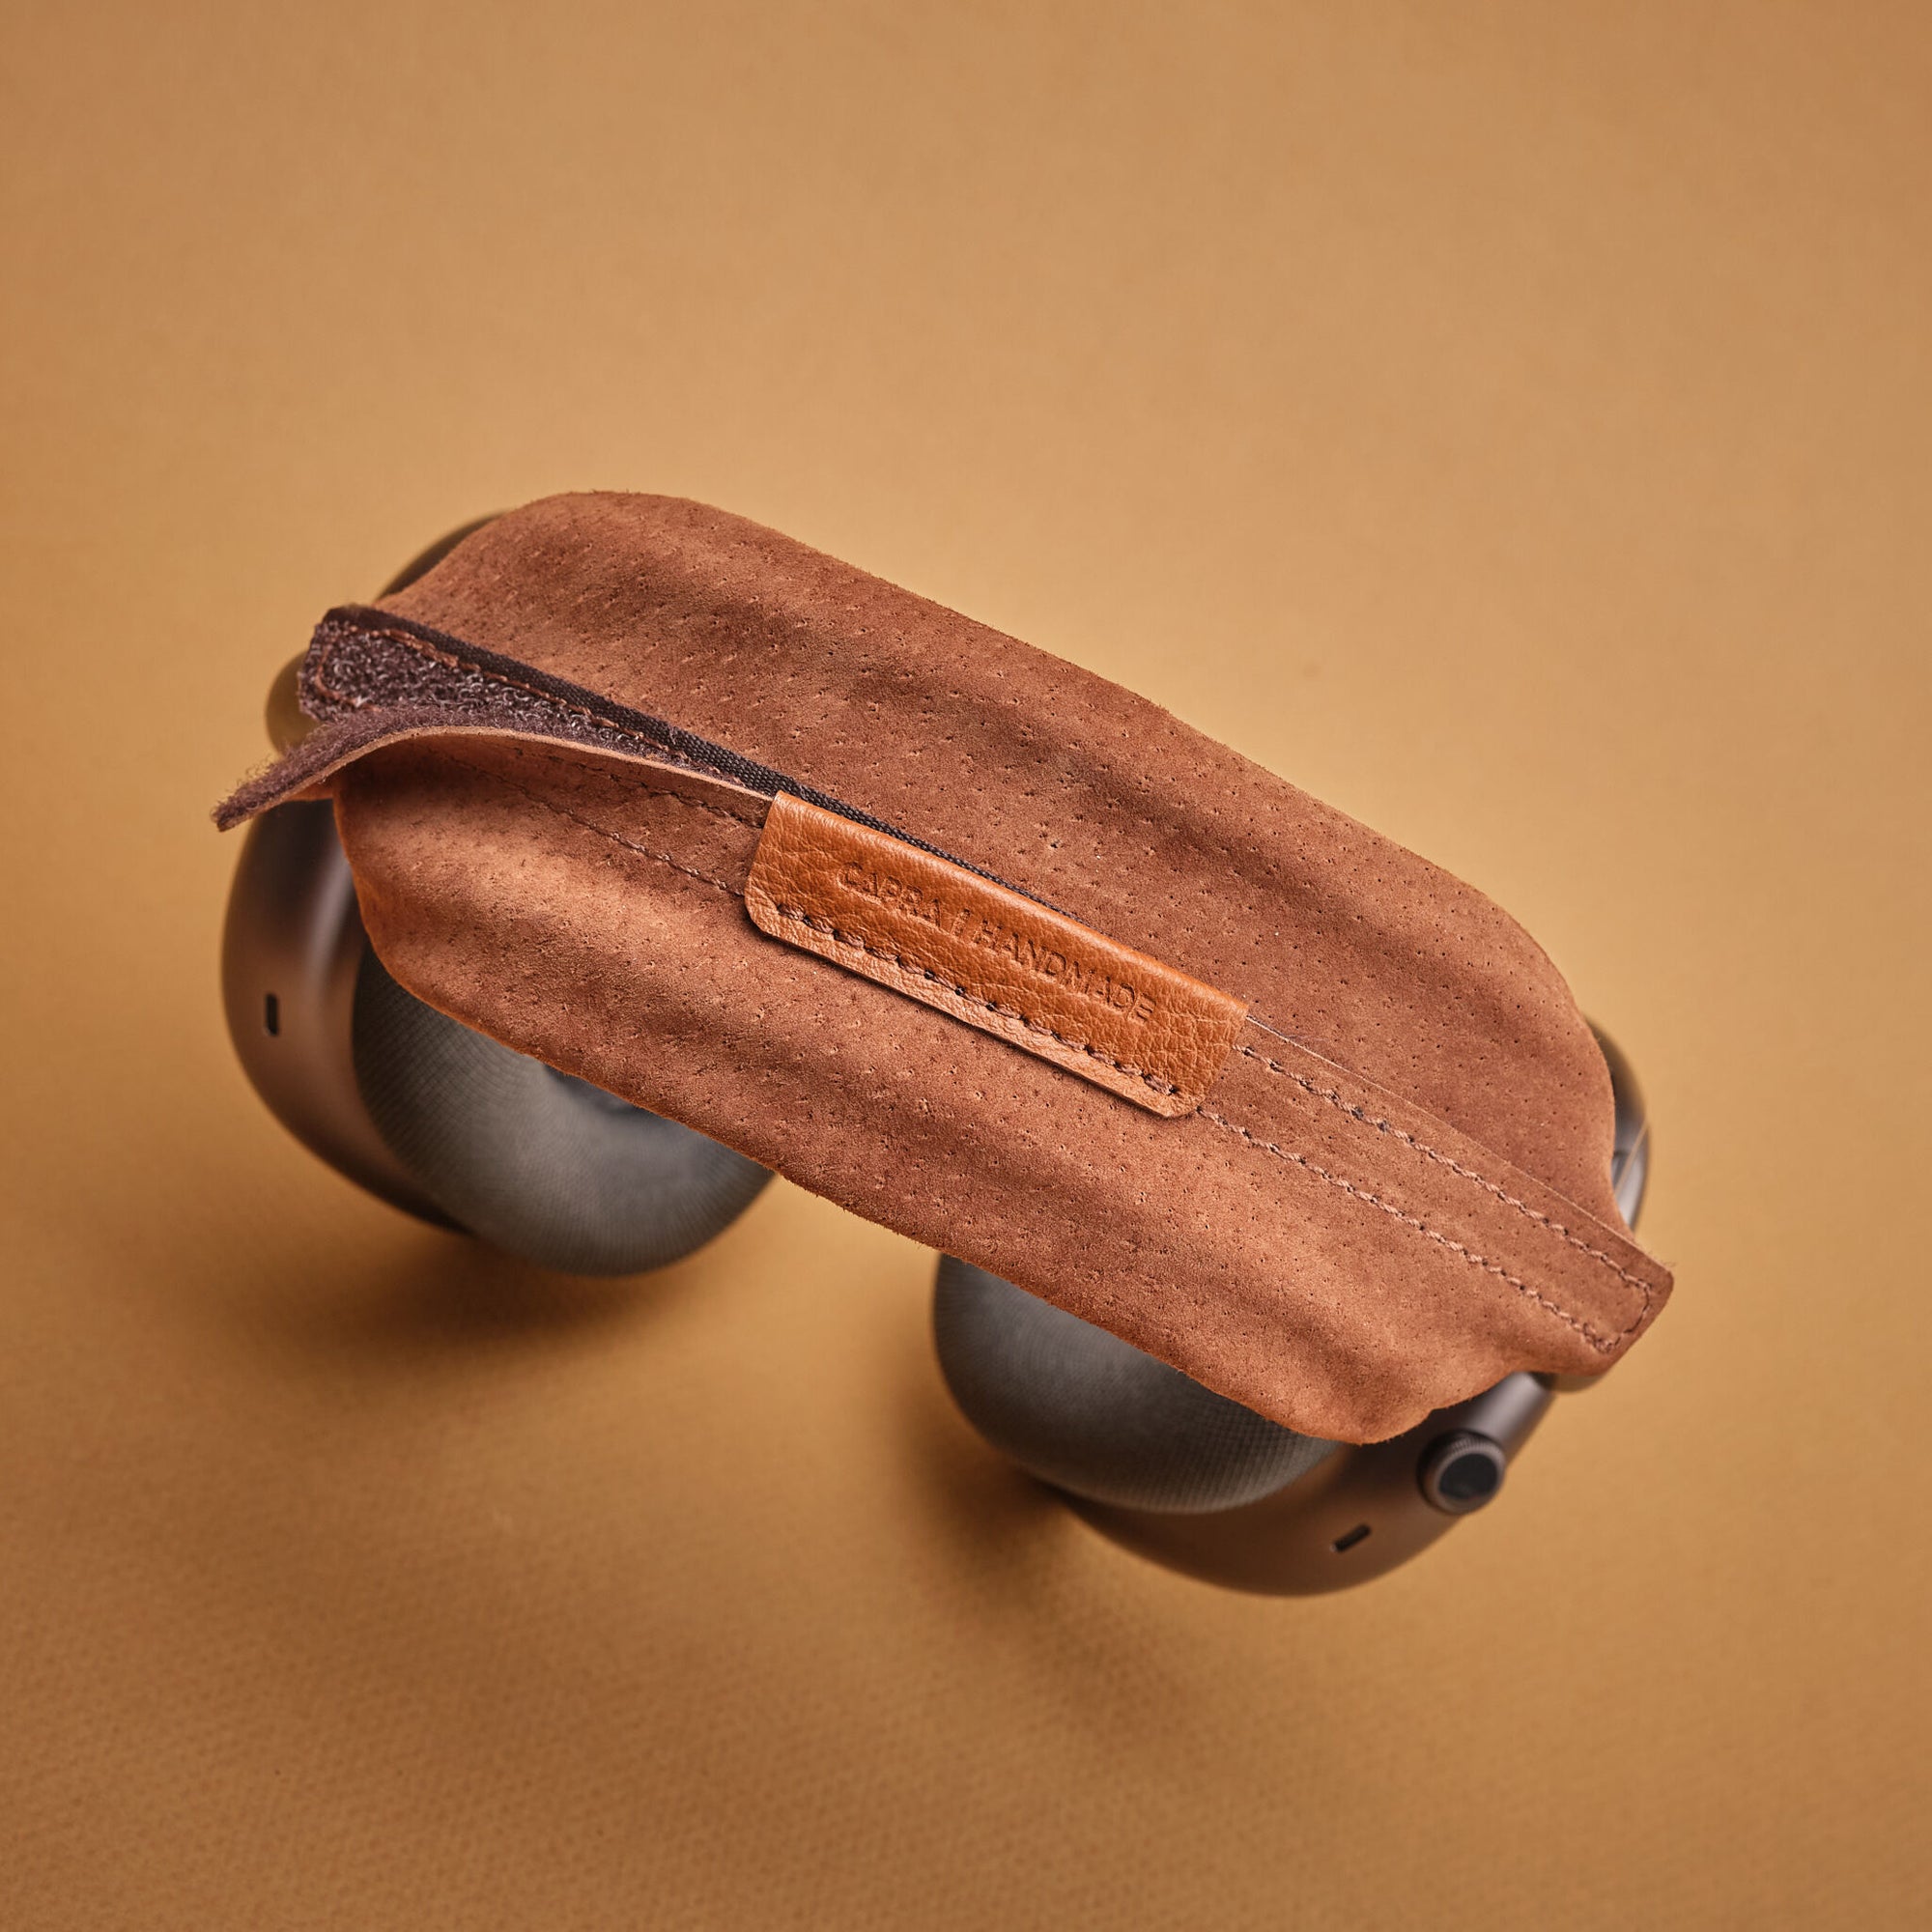 Smart Case AirPods Max. Headphone Headband Cover Tan by Capra Leather